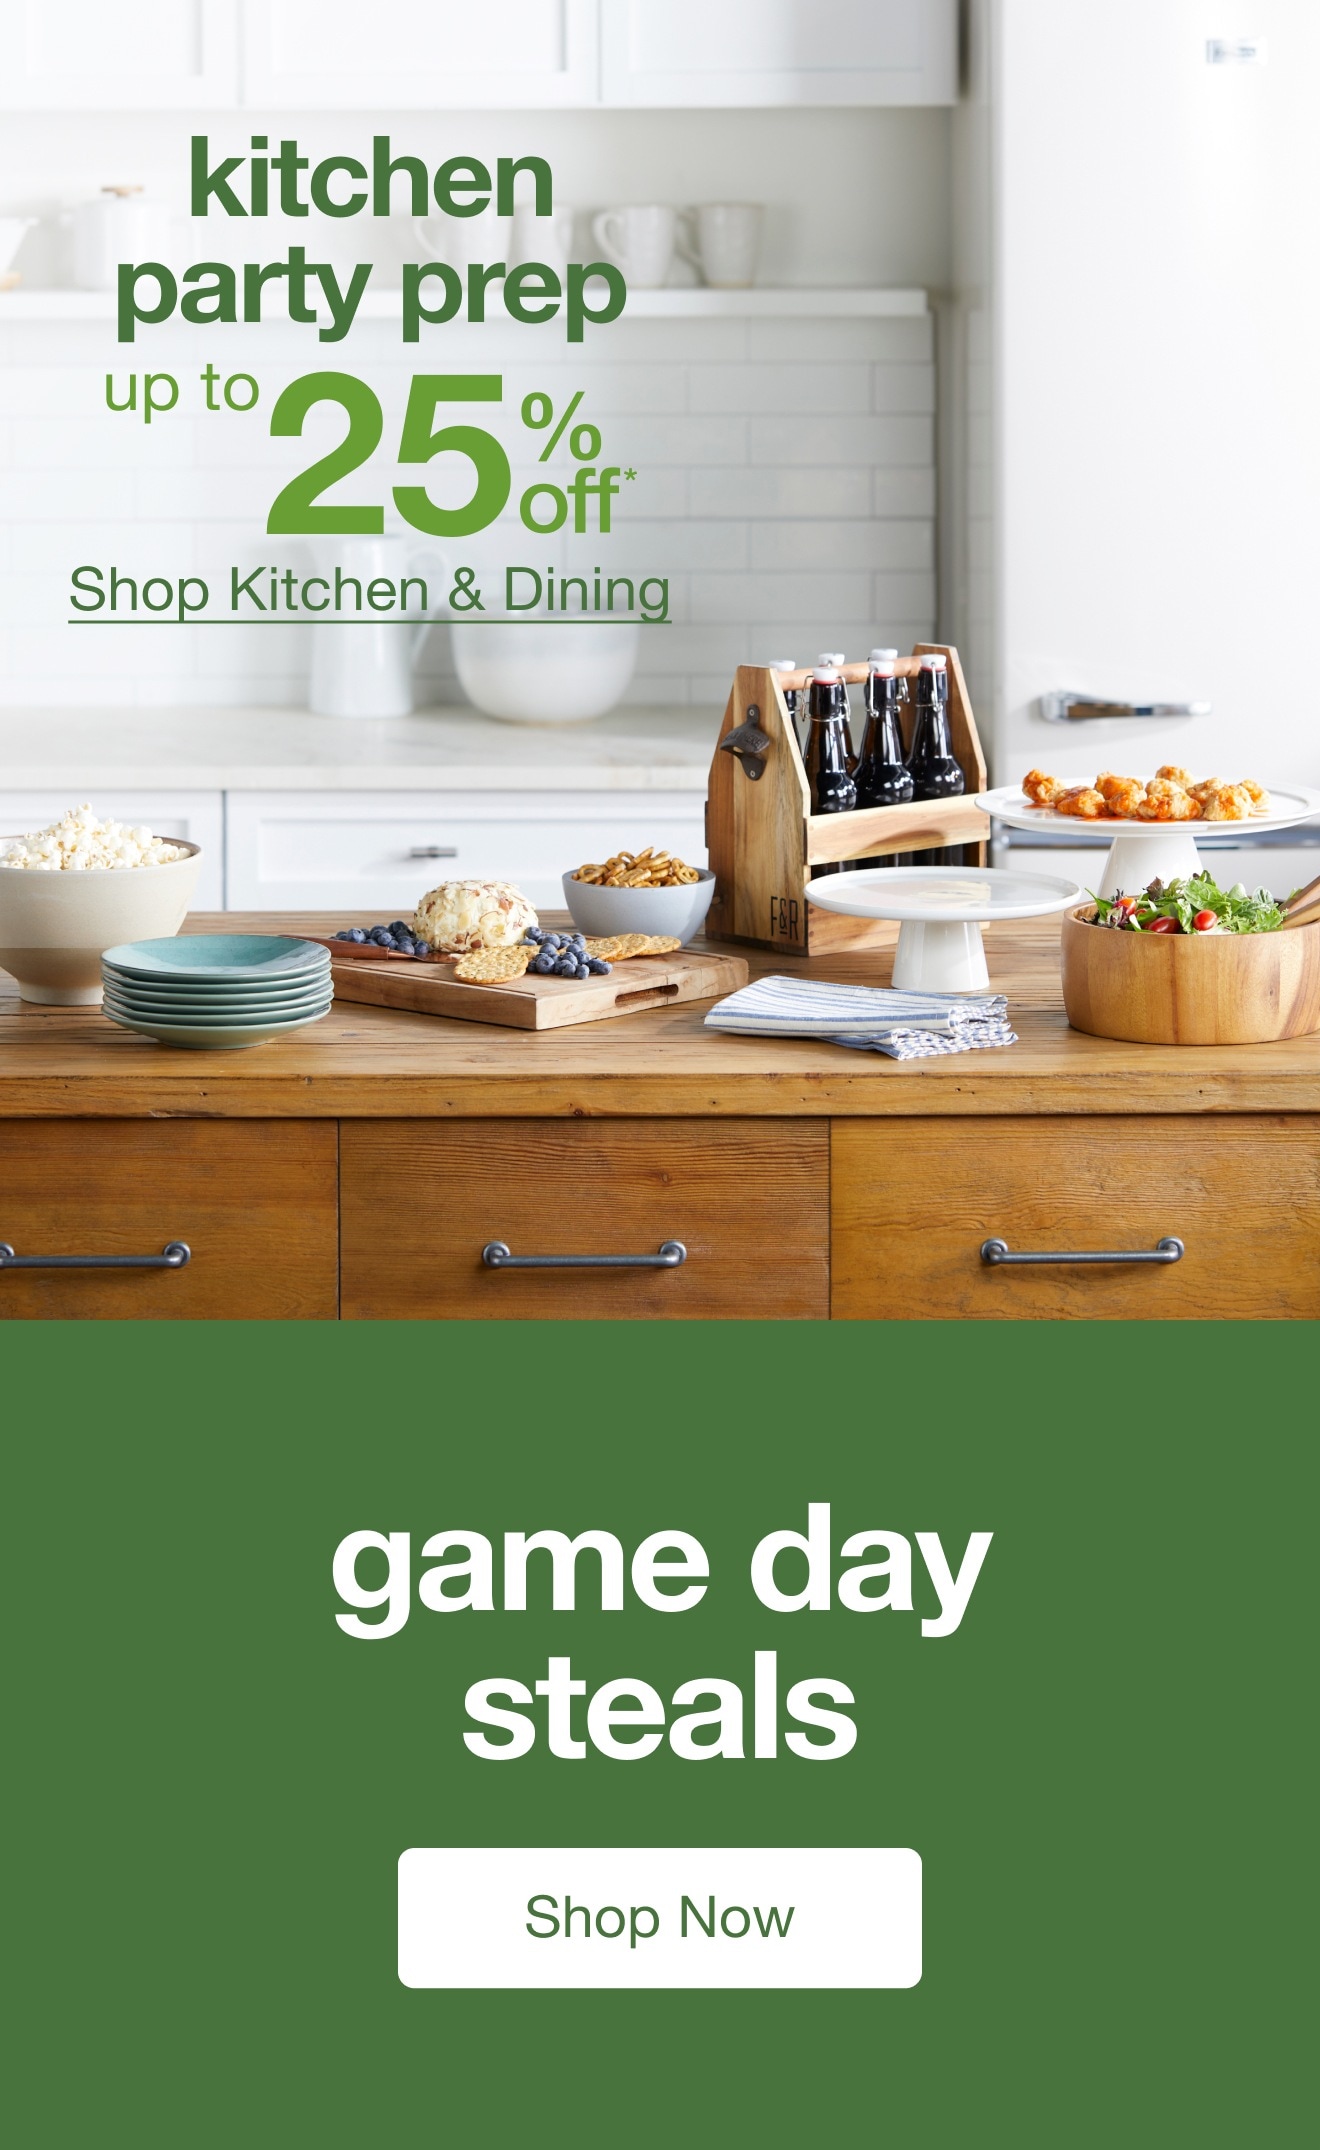 Kitchen Party Prep Up to 25% Off* — Shop Now!